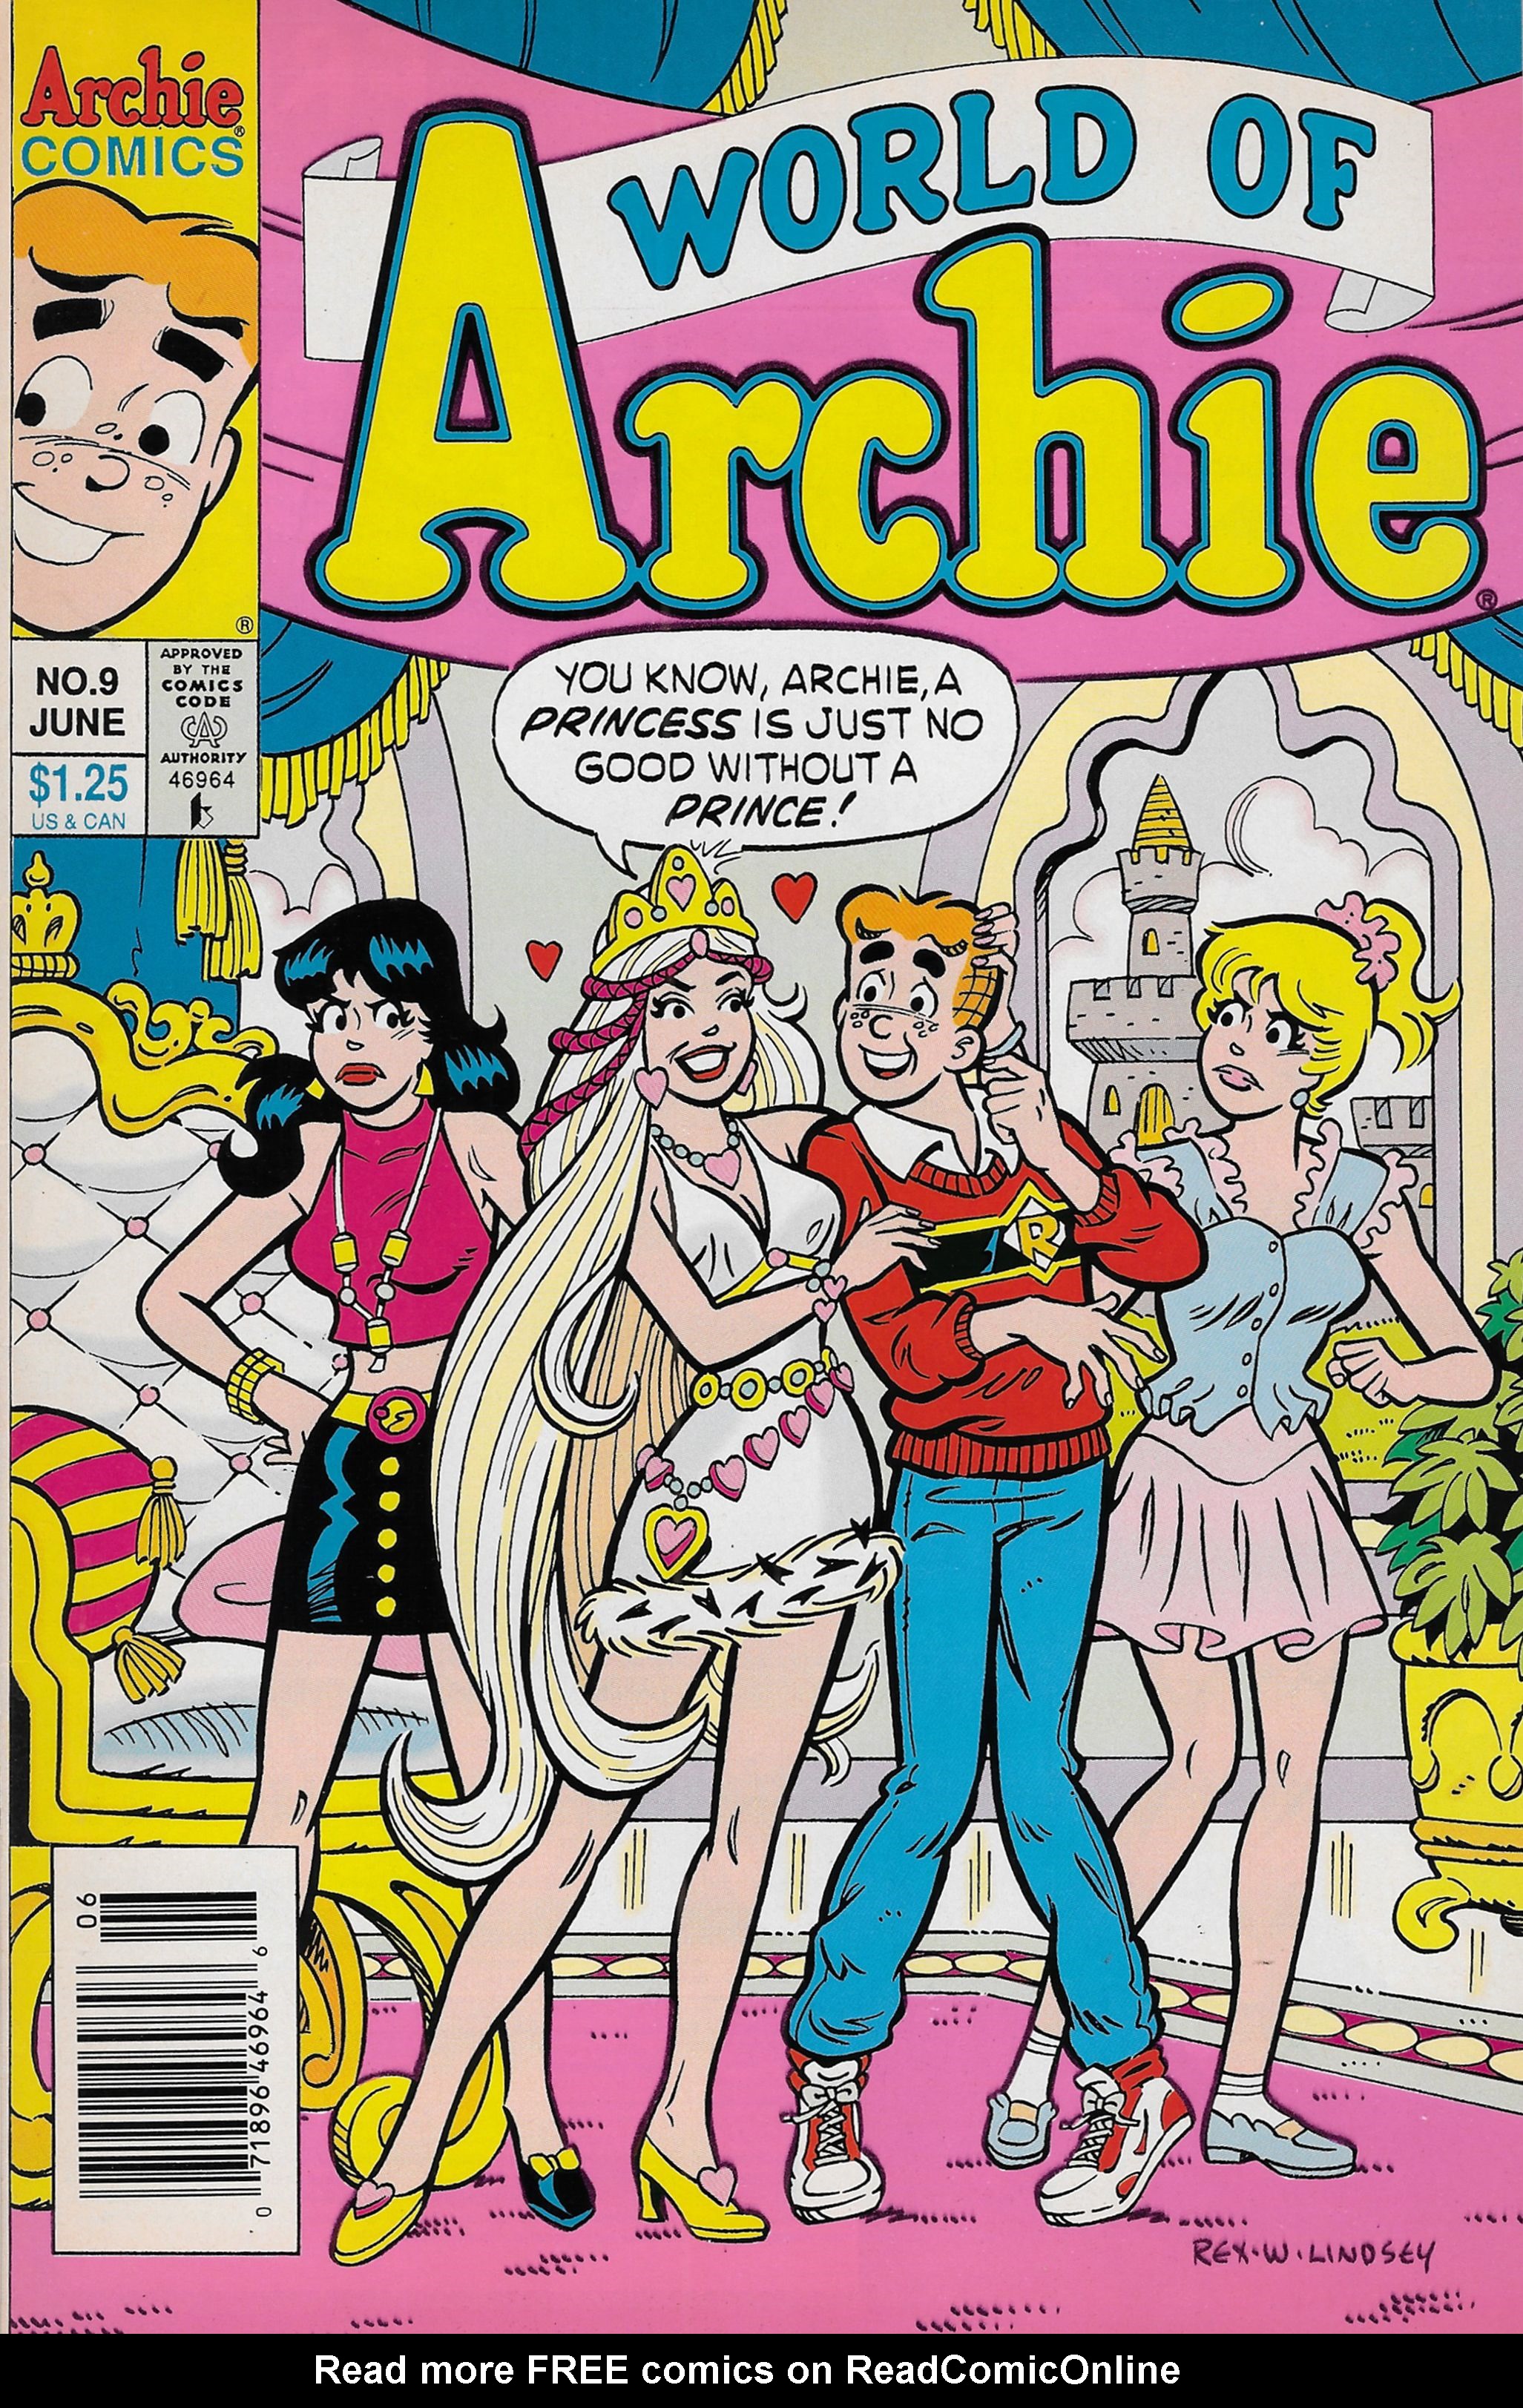 Read online World of Archie comic -  Issue #9 - 1